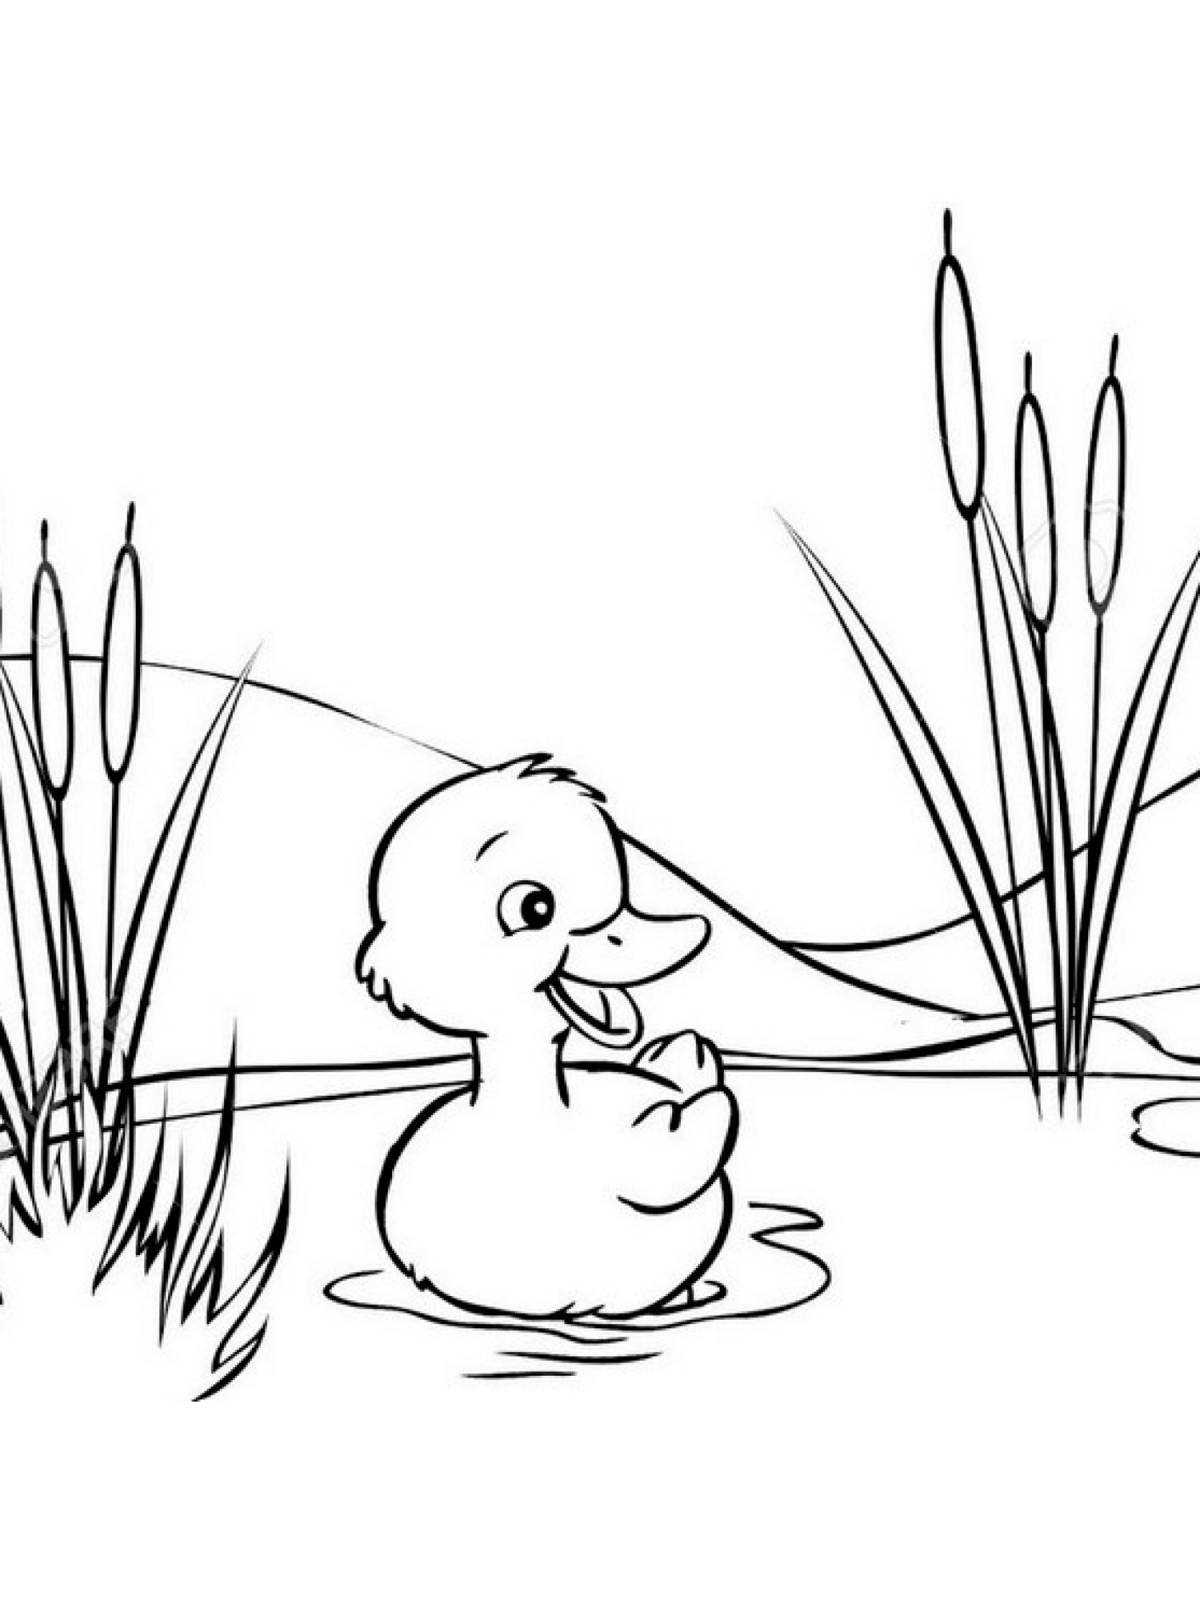 Coloring page brave duck - glorious